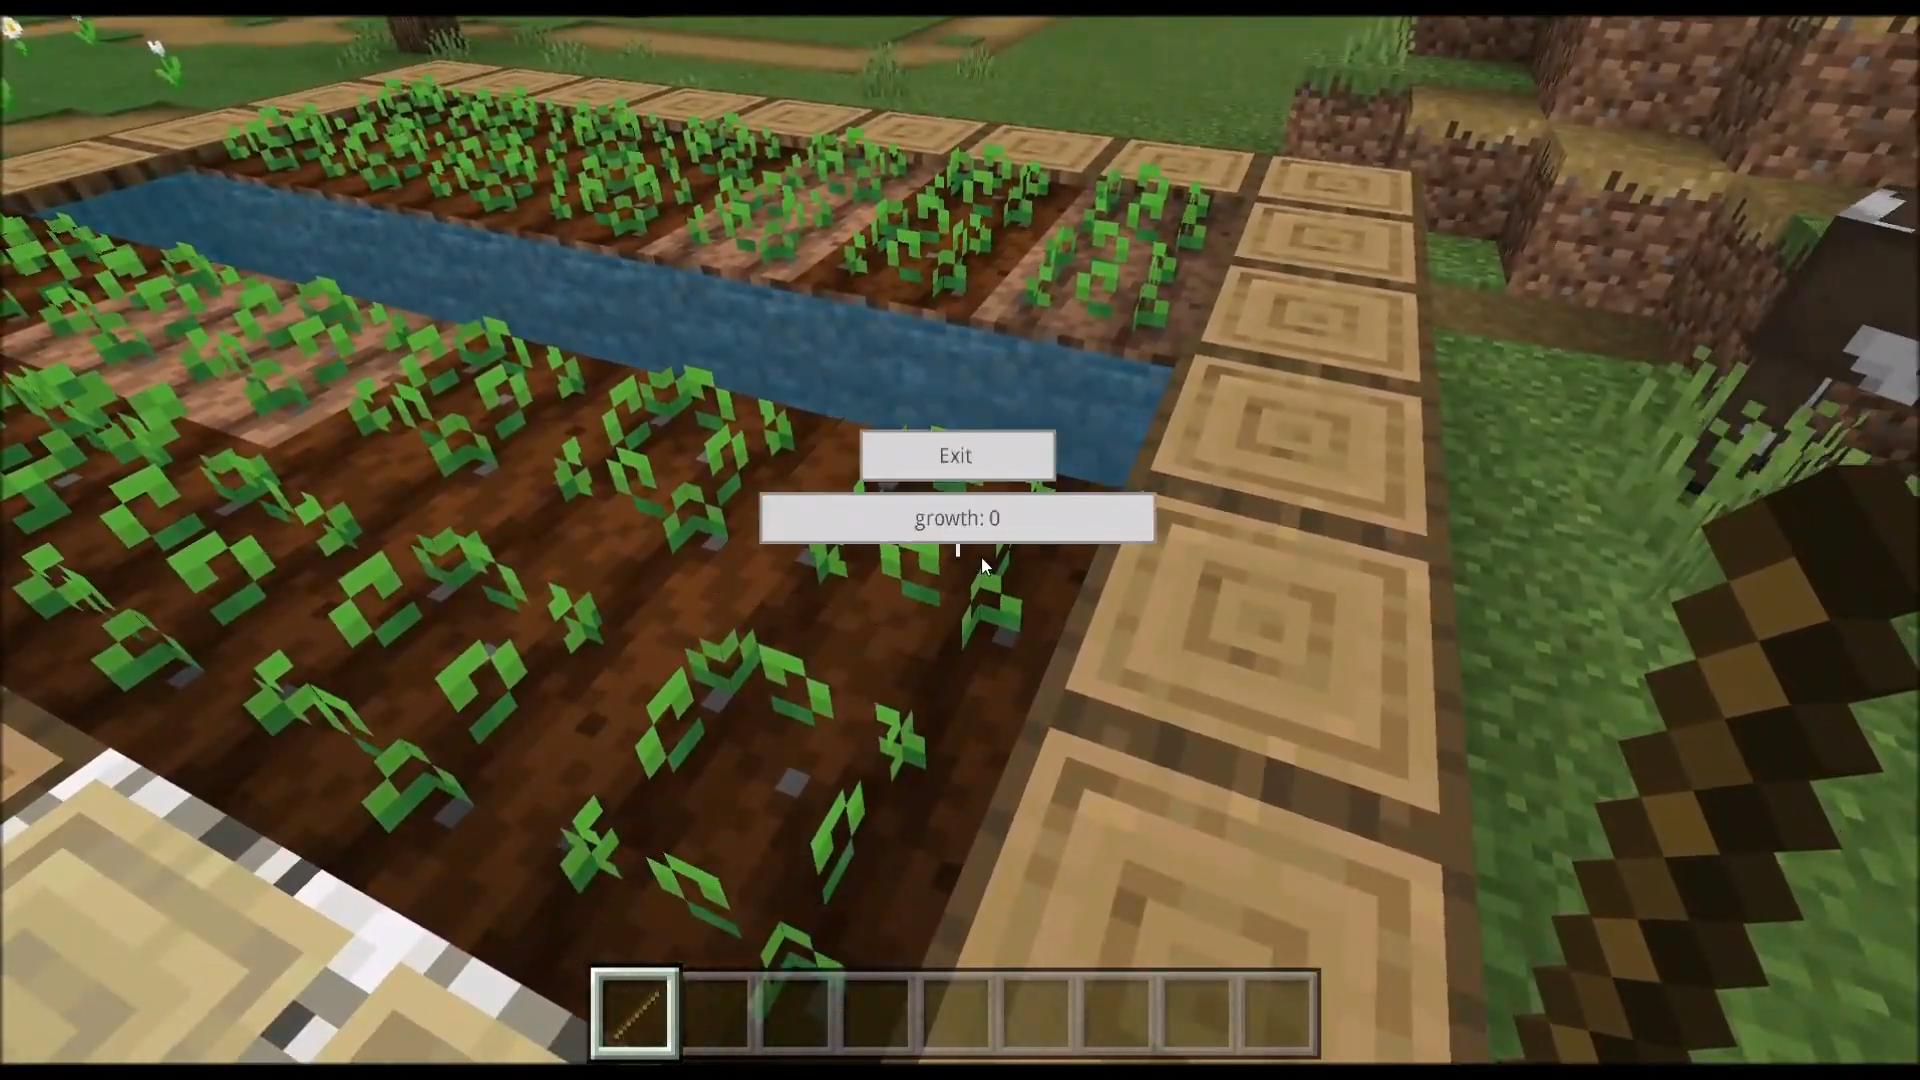 Clay s Brainrot Minecraft Looks Like They Might Open With Minecraft Earth T Co Yeqkeioxii Twitter